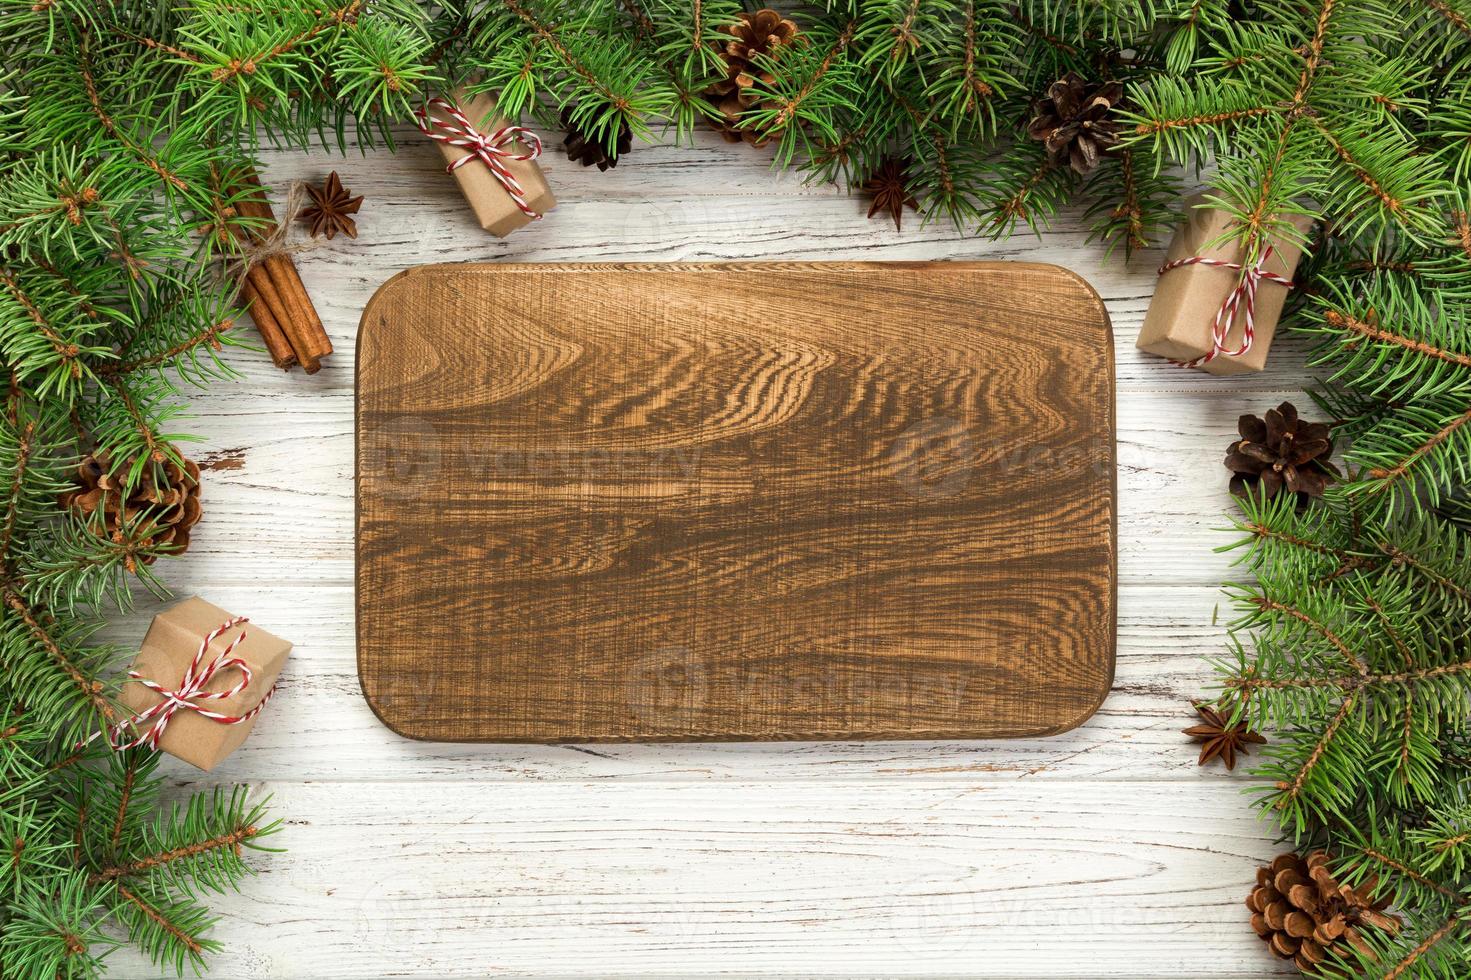 top view. Empty wood rectangular plate on wooden christmas background. holiday dinner dish concept with new year decor photo